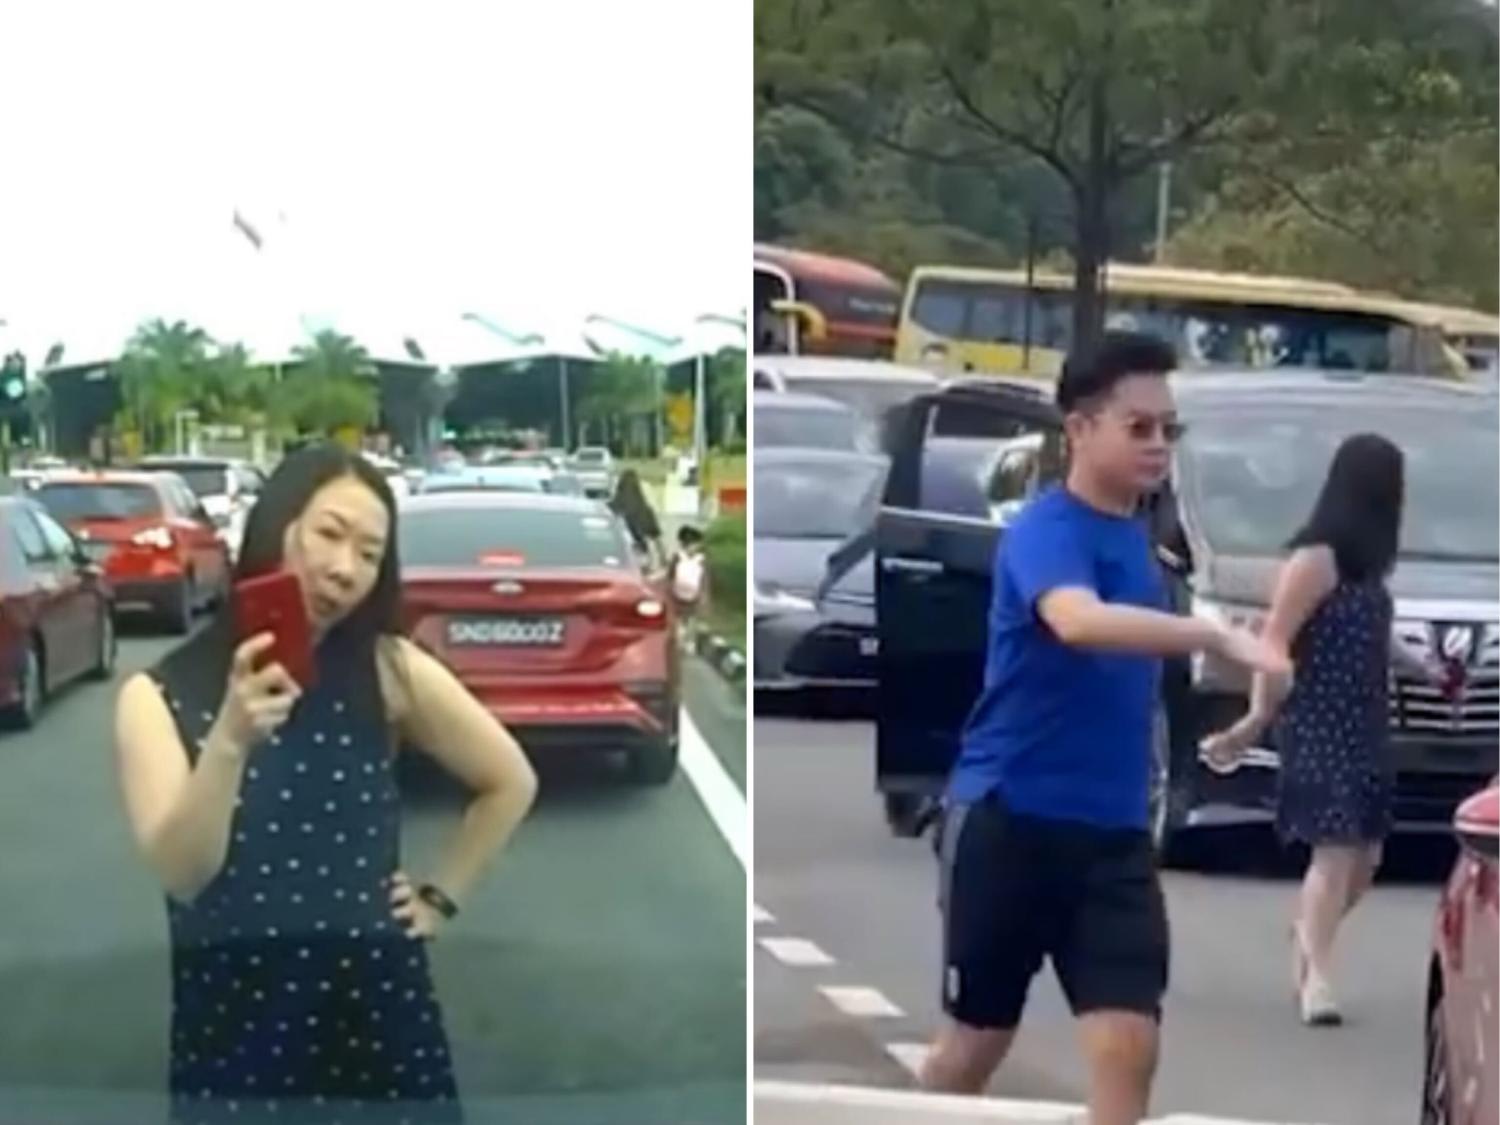 A screen grab of the woman and man allegedly involved in the road rage incident at Tuas Second Link.